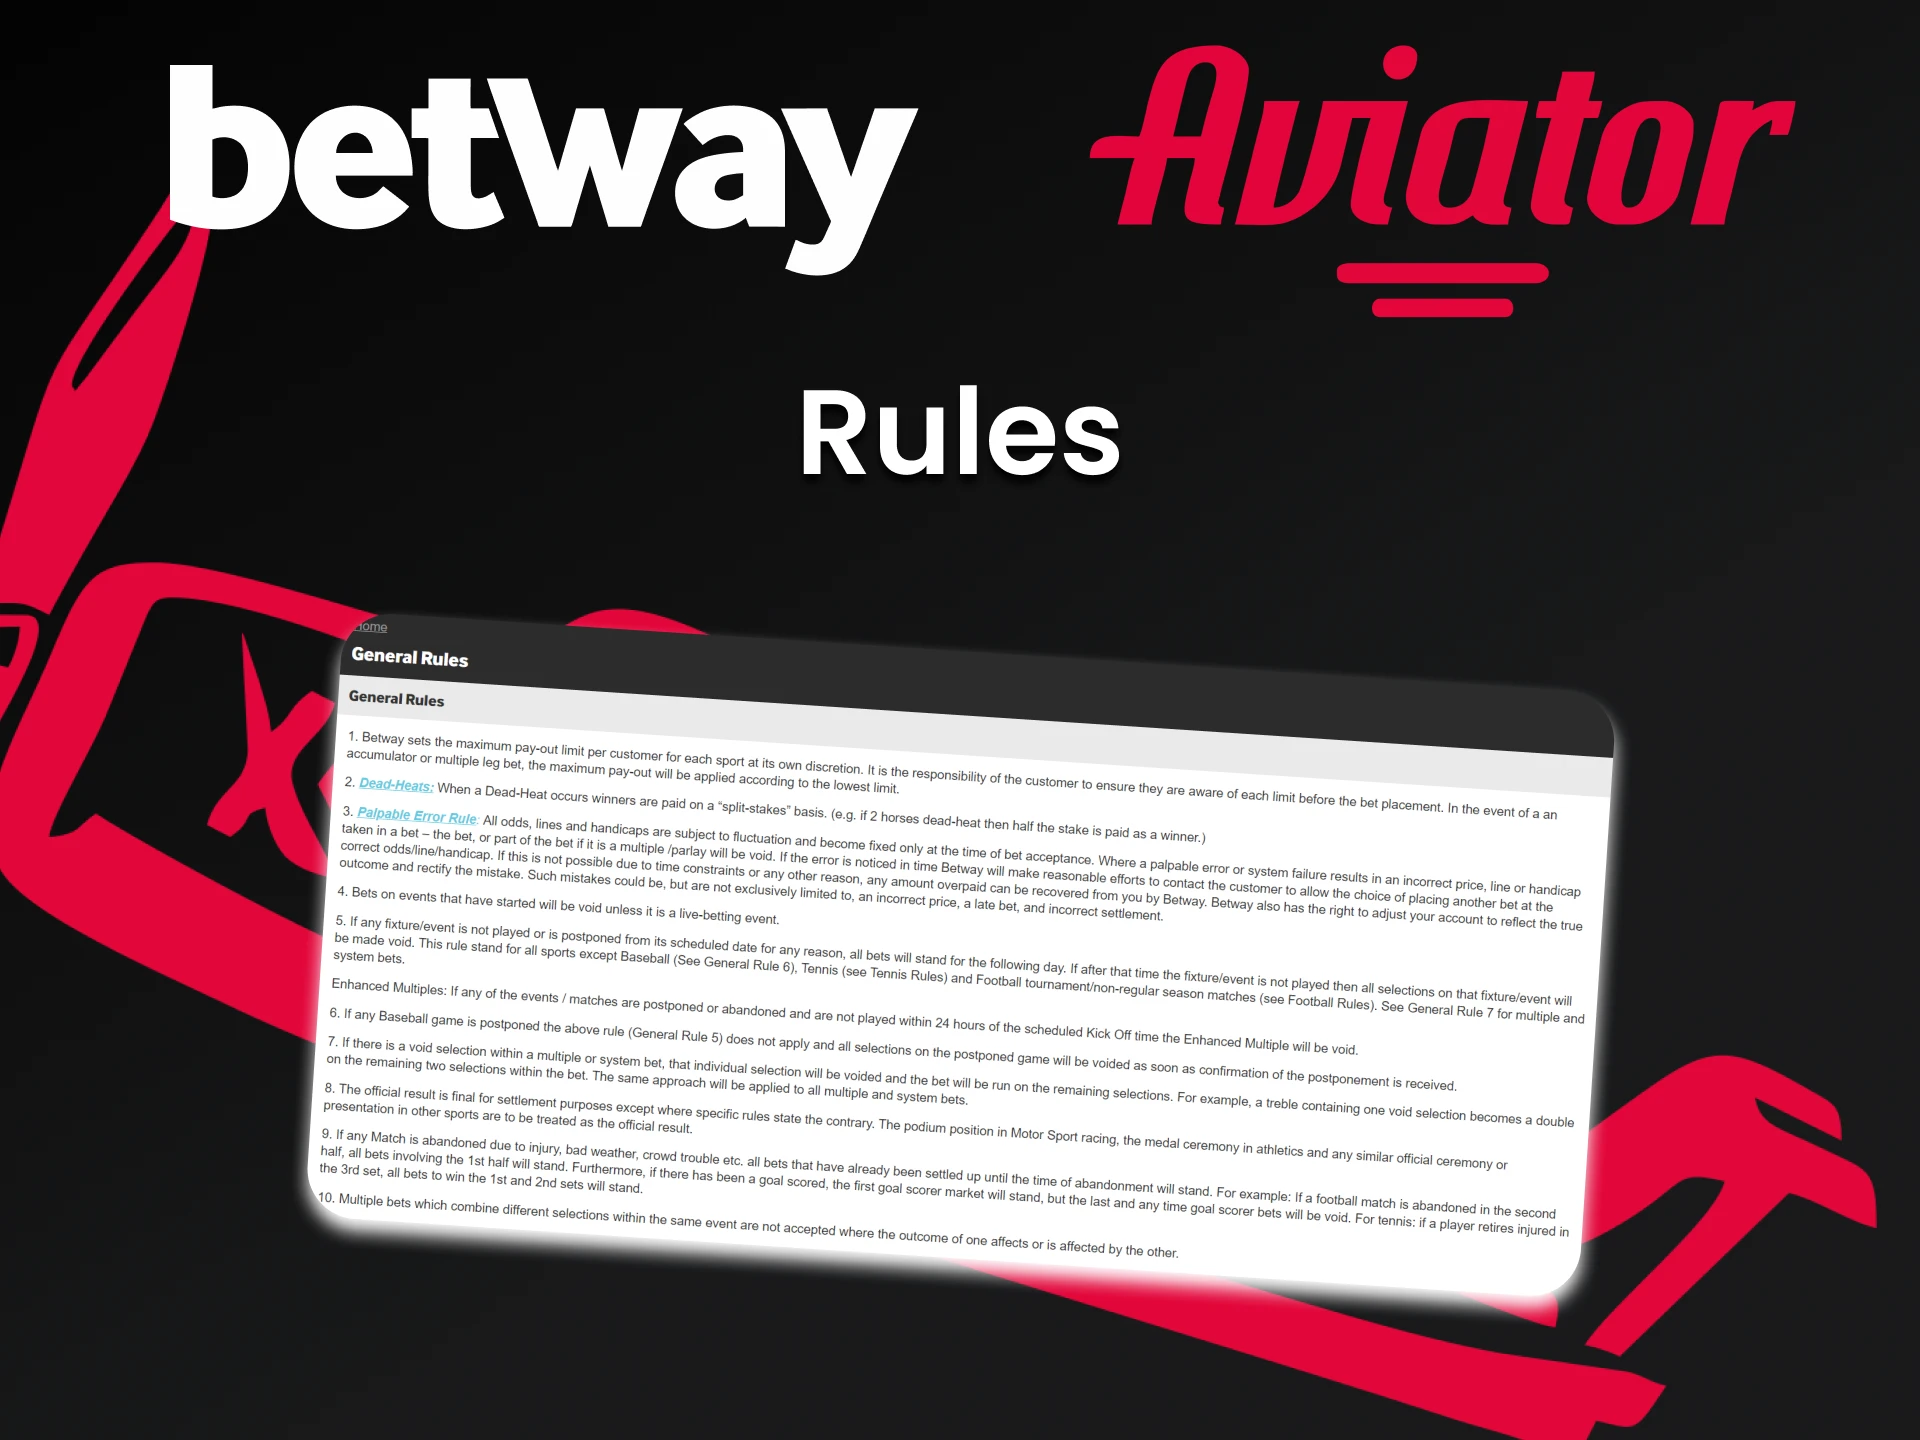 Learn the rules for using the Betway service.